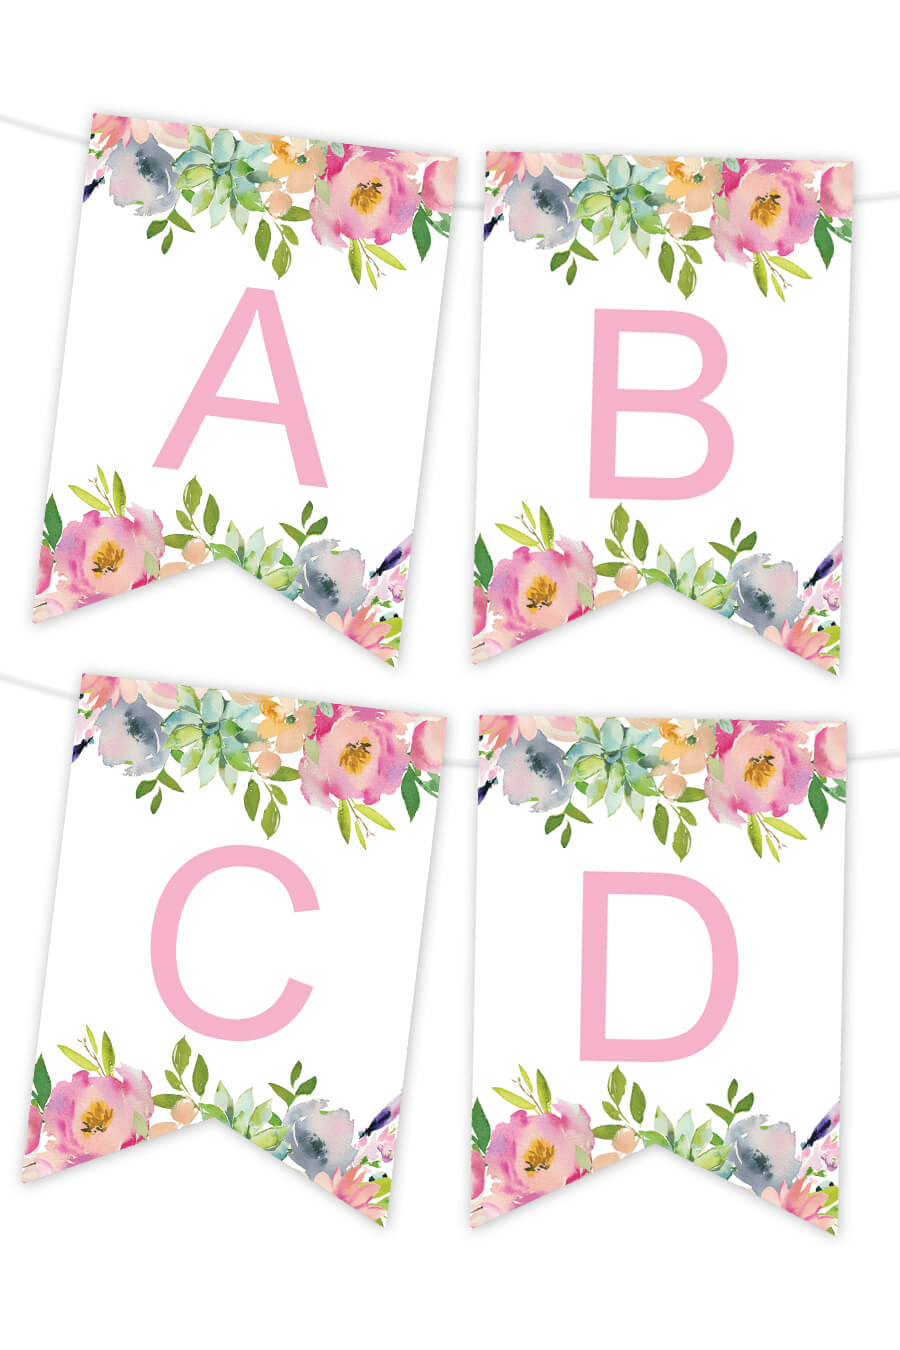 Impertinent Free Printable Banner Templates | Kenzi's Blog In Free Printable Party Banner Templates